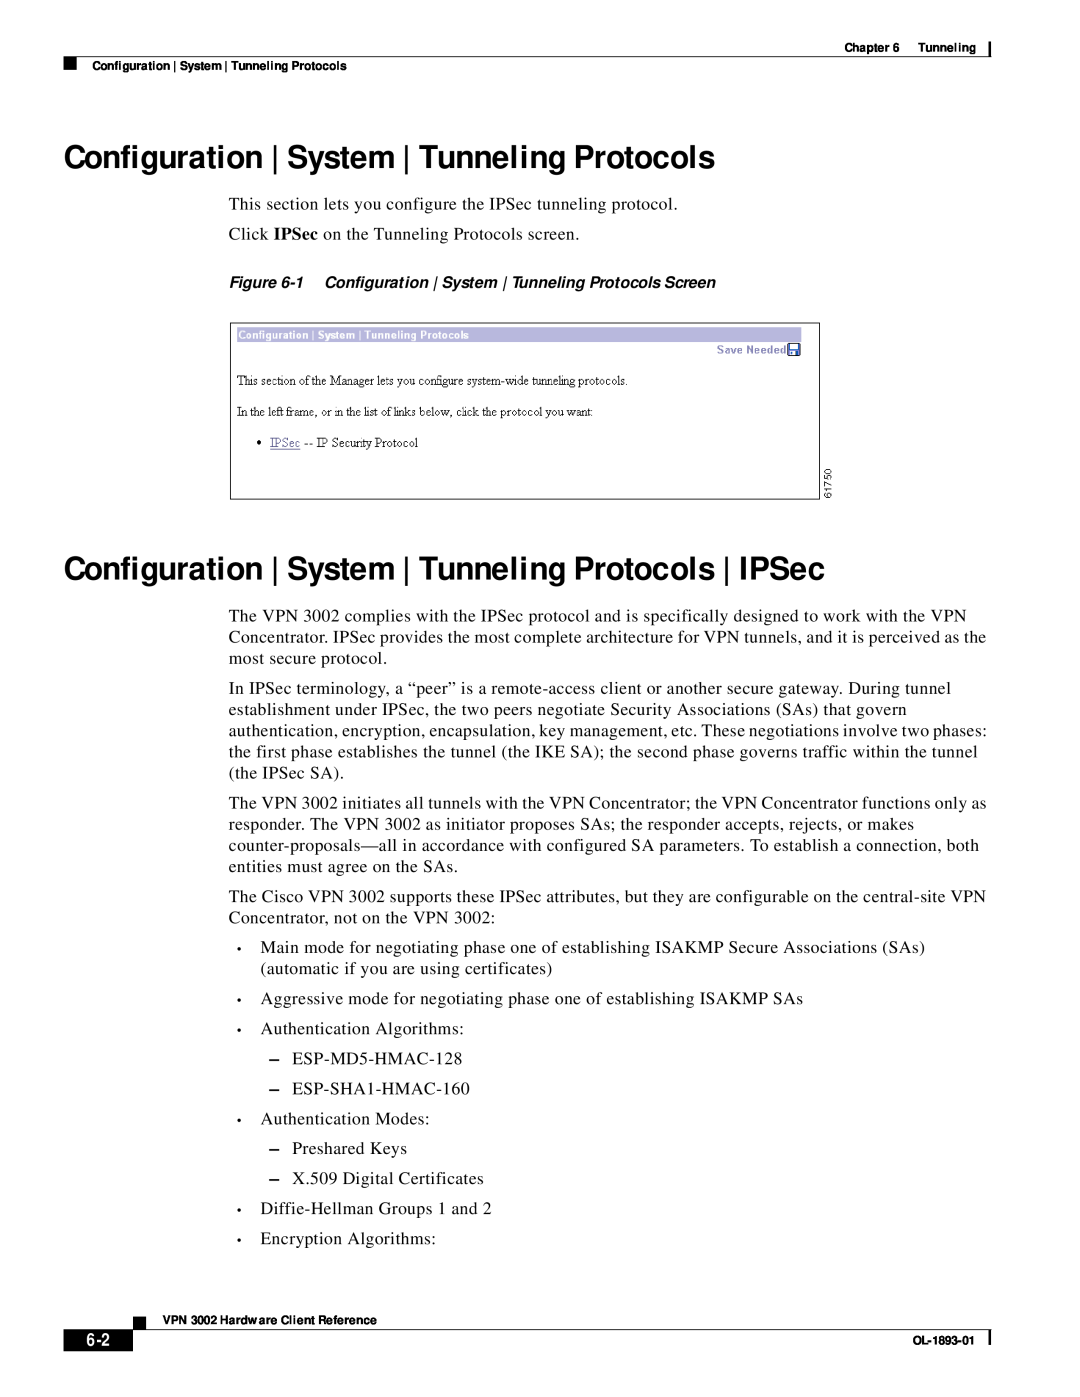 Cisco Systems VPN 3002 manual Configuration System Tunneling Protocols 